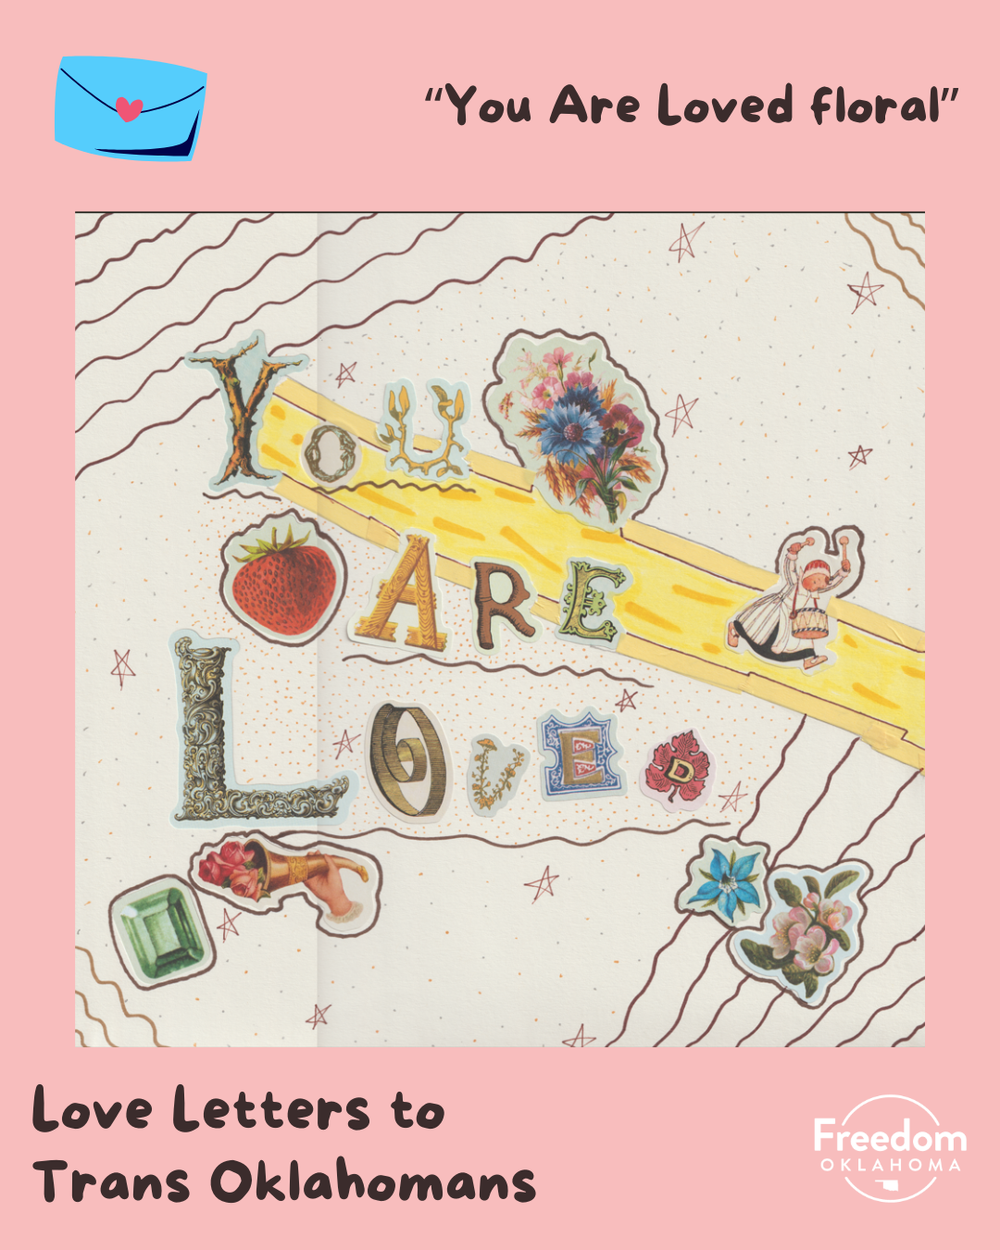  Similar pink graphic with artwork in the center: scanned paper collage. A white paper background decorated with drawn wavy lines, dots, and starts. Stickers decorate the center with flowers and fruit and text "You Are Loved" 